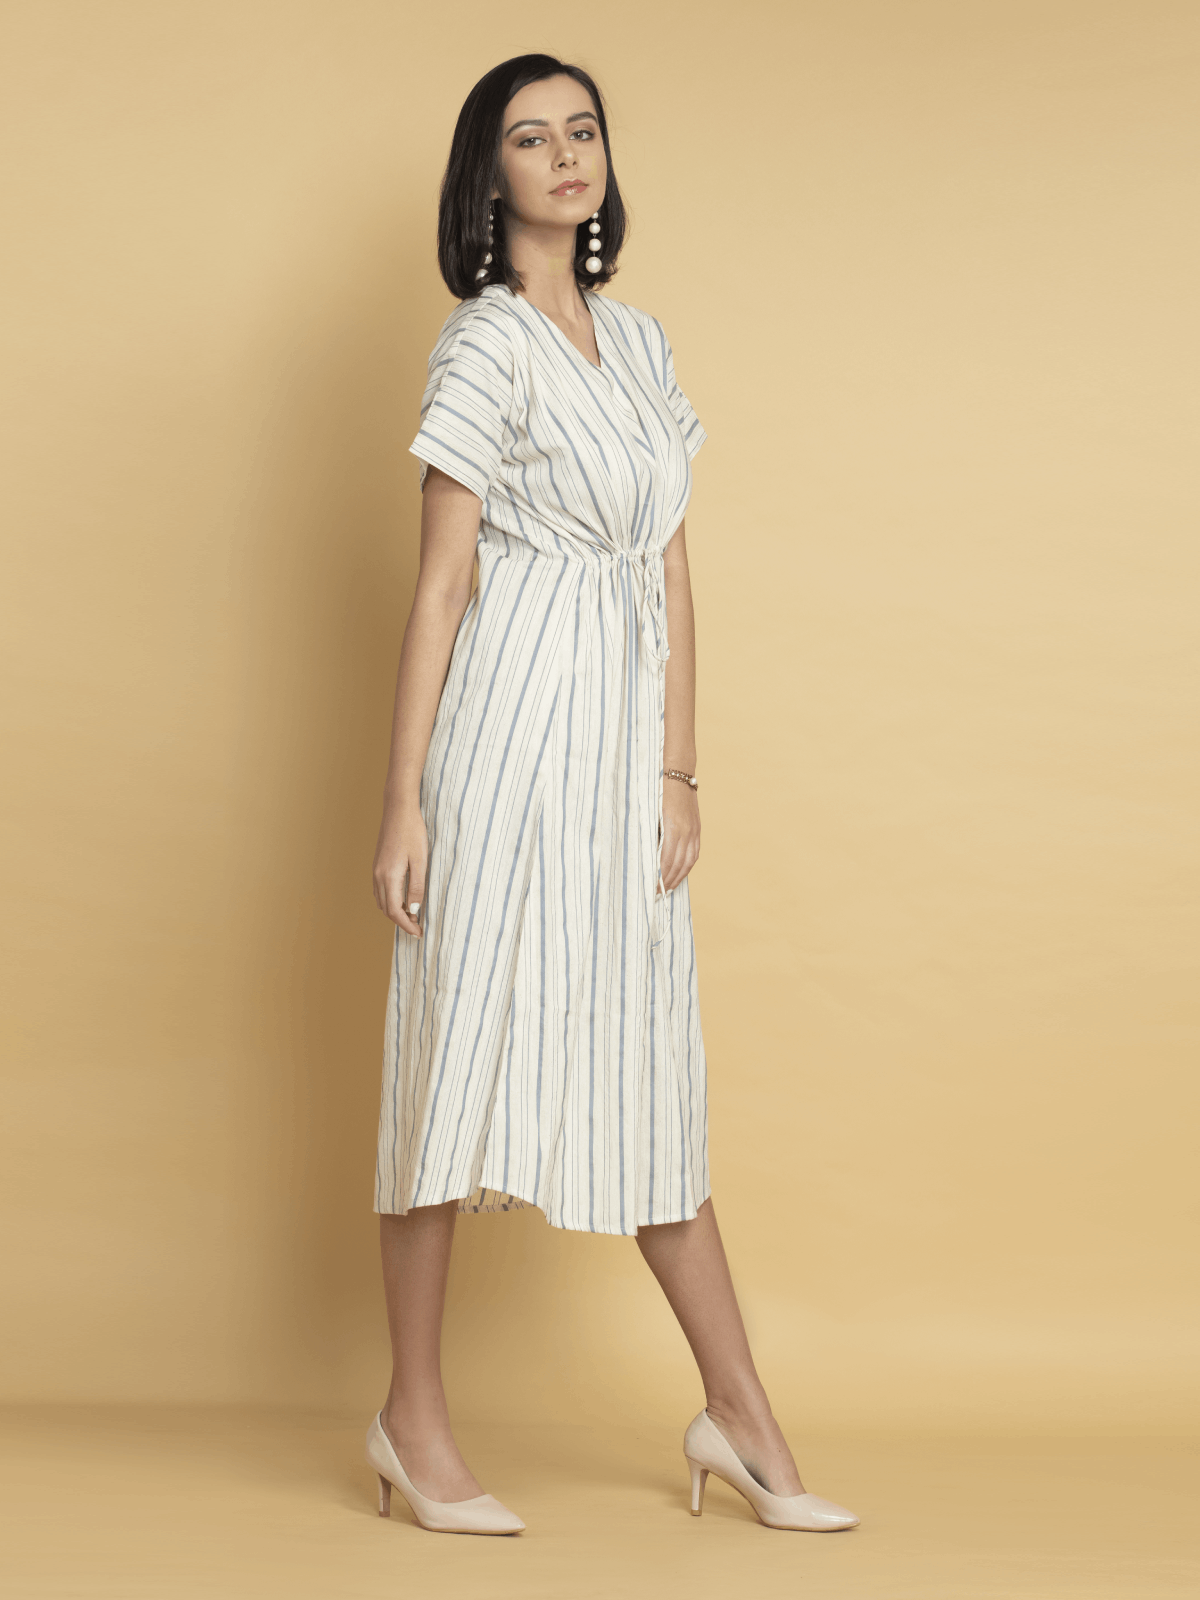 Shop Now Blue - Cream Strips Printed Kaftan Dress From Octics at rs 1299 | OCTICS